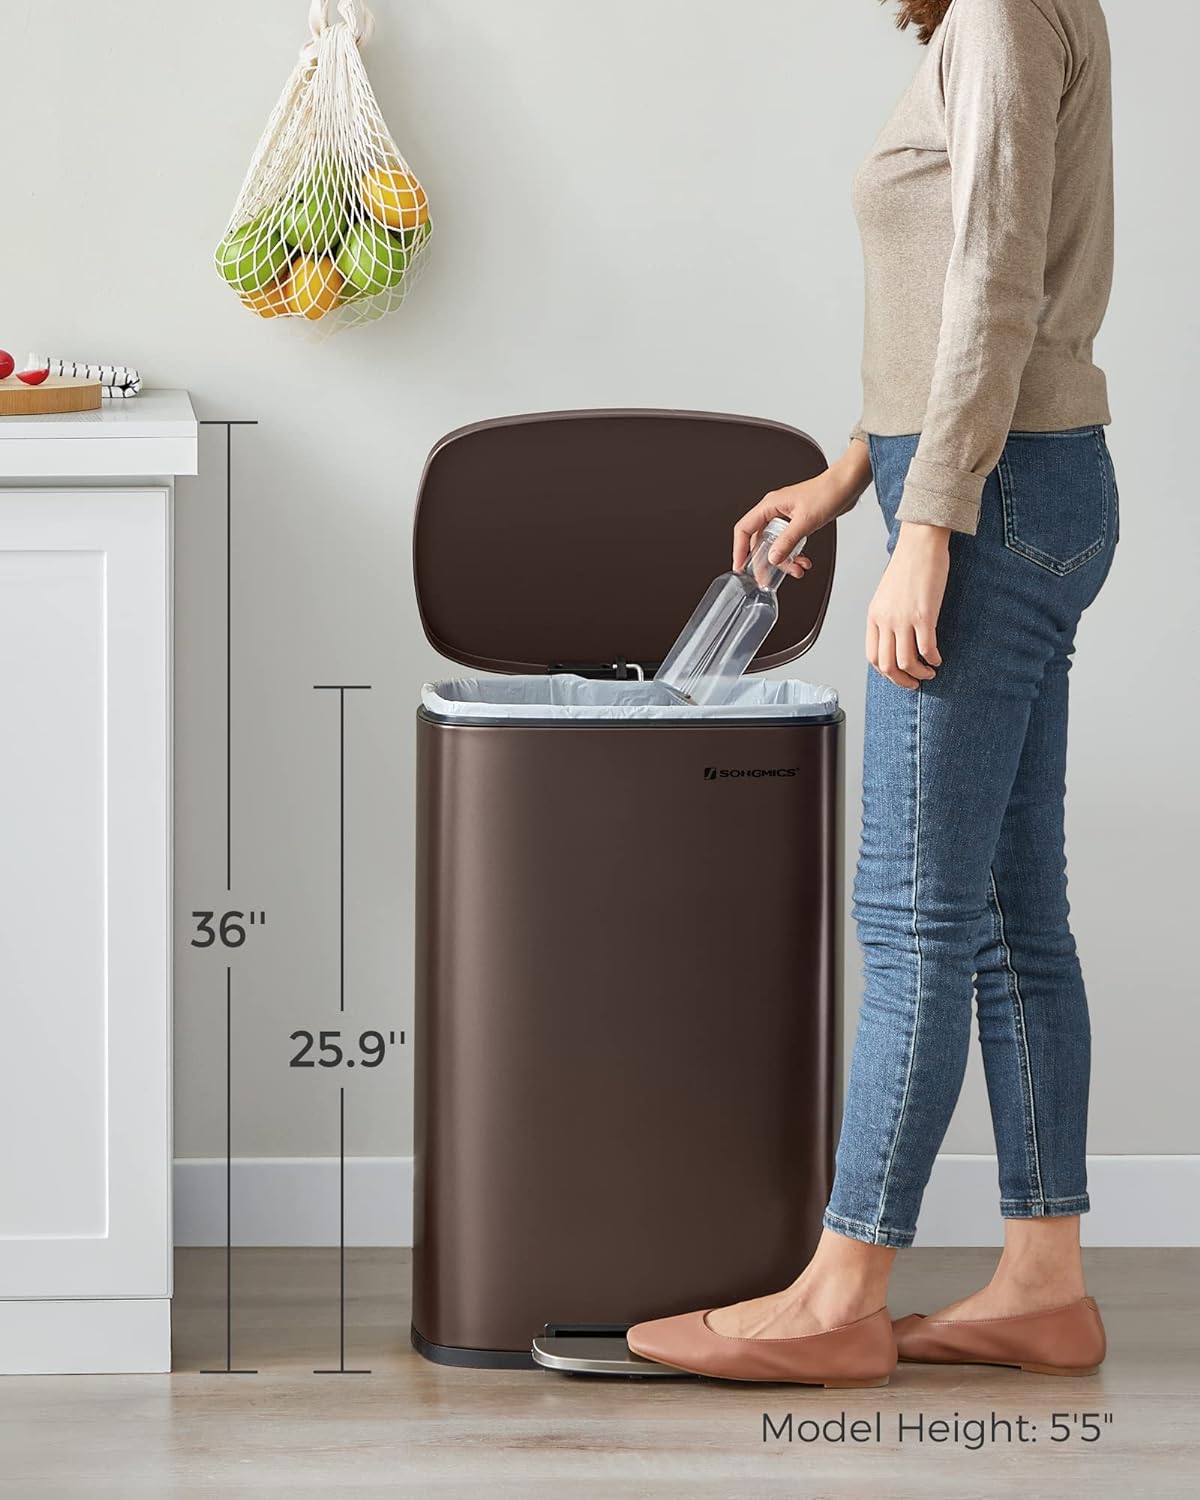 https://bigbigmart.com/wp-content/uploads/2023/11/SONGMICS-13-Gallon-Trash-Can-Stainless-Steel-Kitchen-Garbage-Can-Recycling-or-Waste-Bin-Soft-Close-Step-On-Pedal-Removable-Inner-Bucket-Brown-ULTB50BR7.jpg